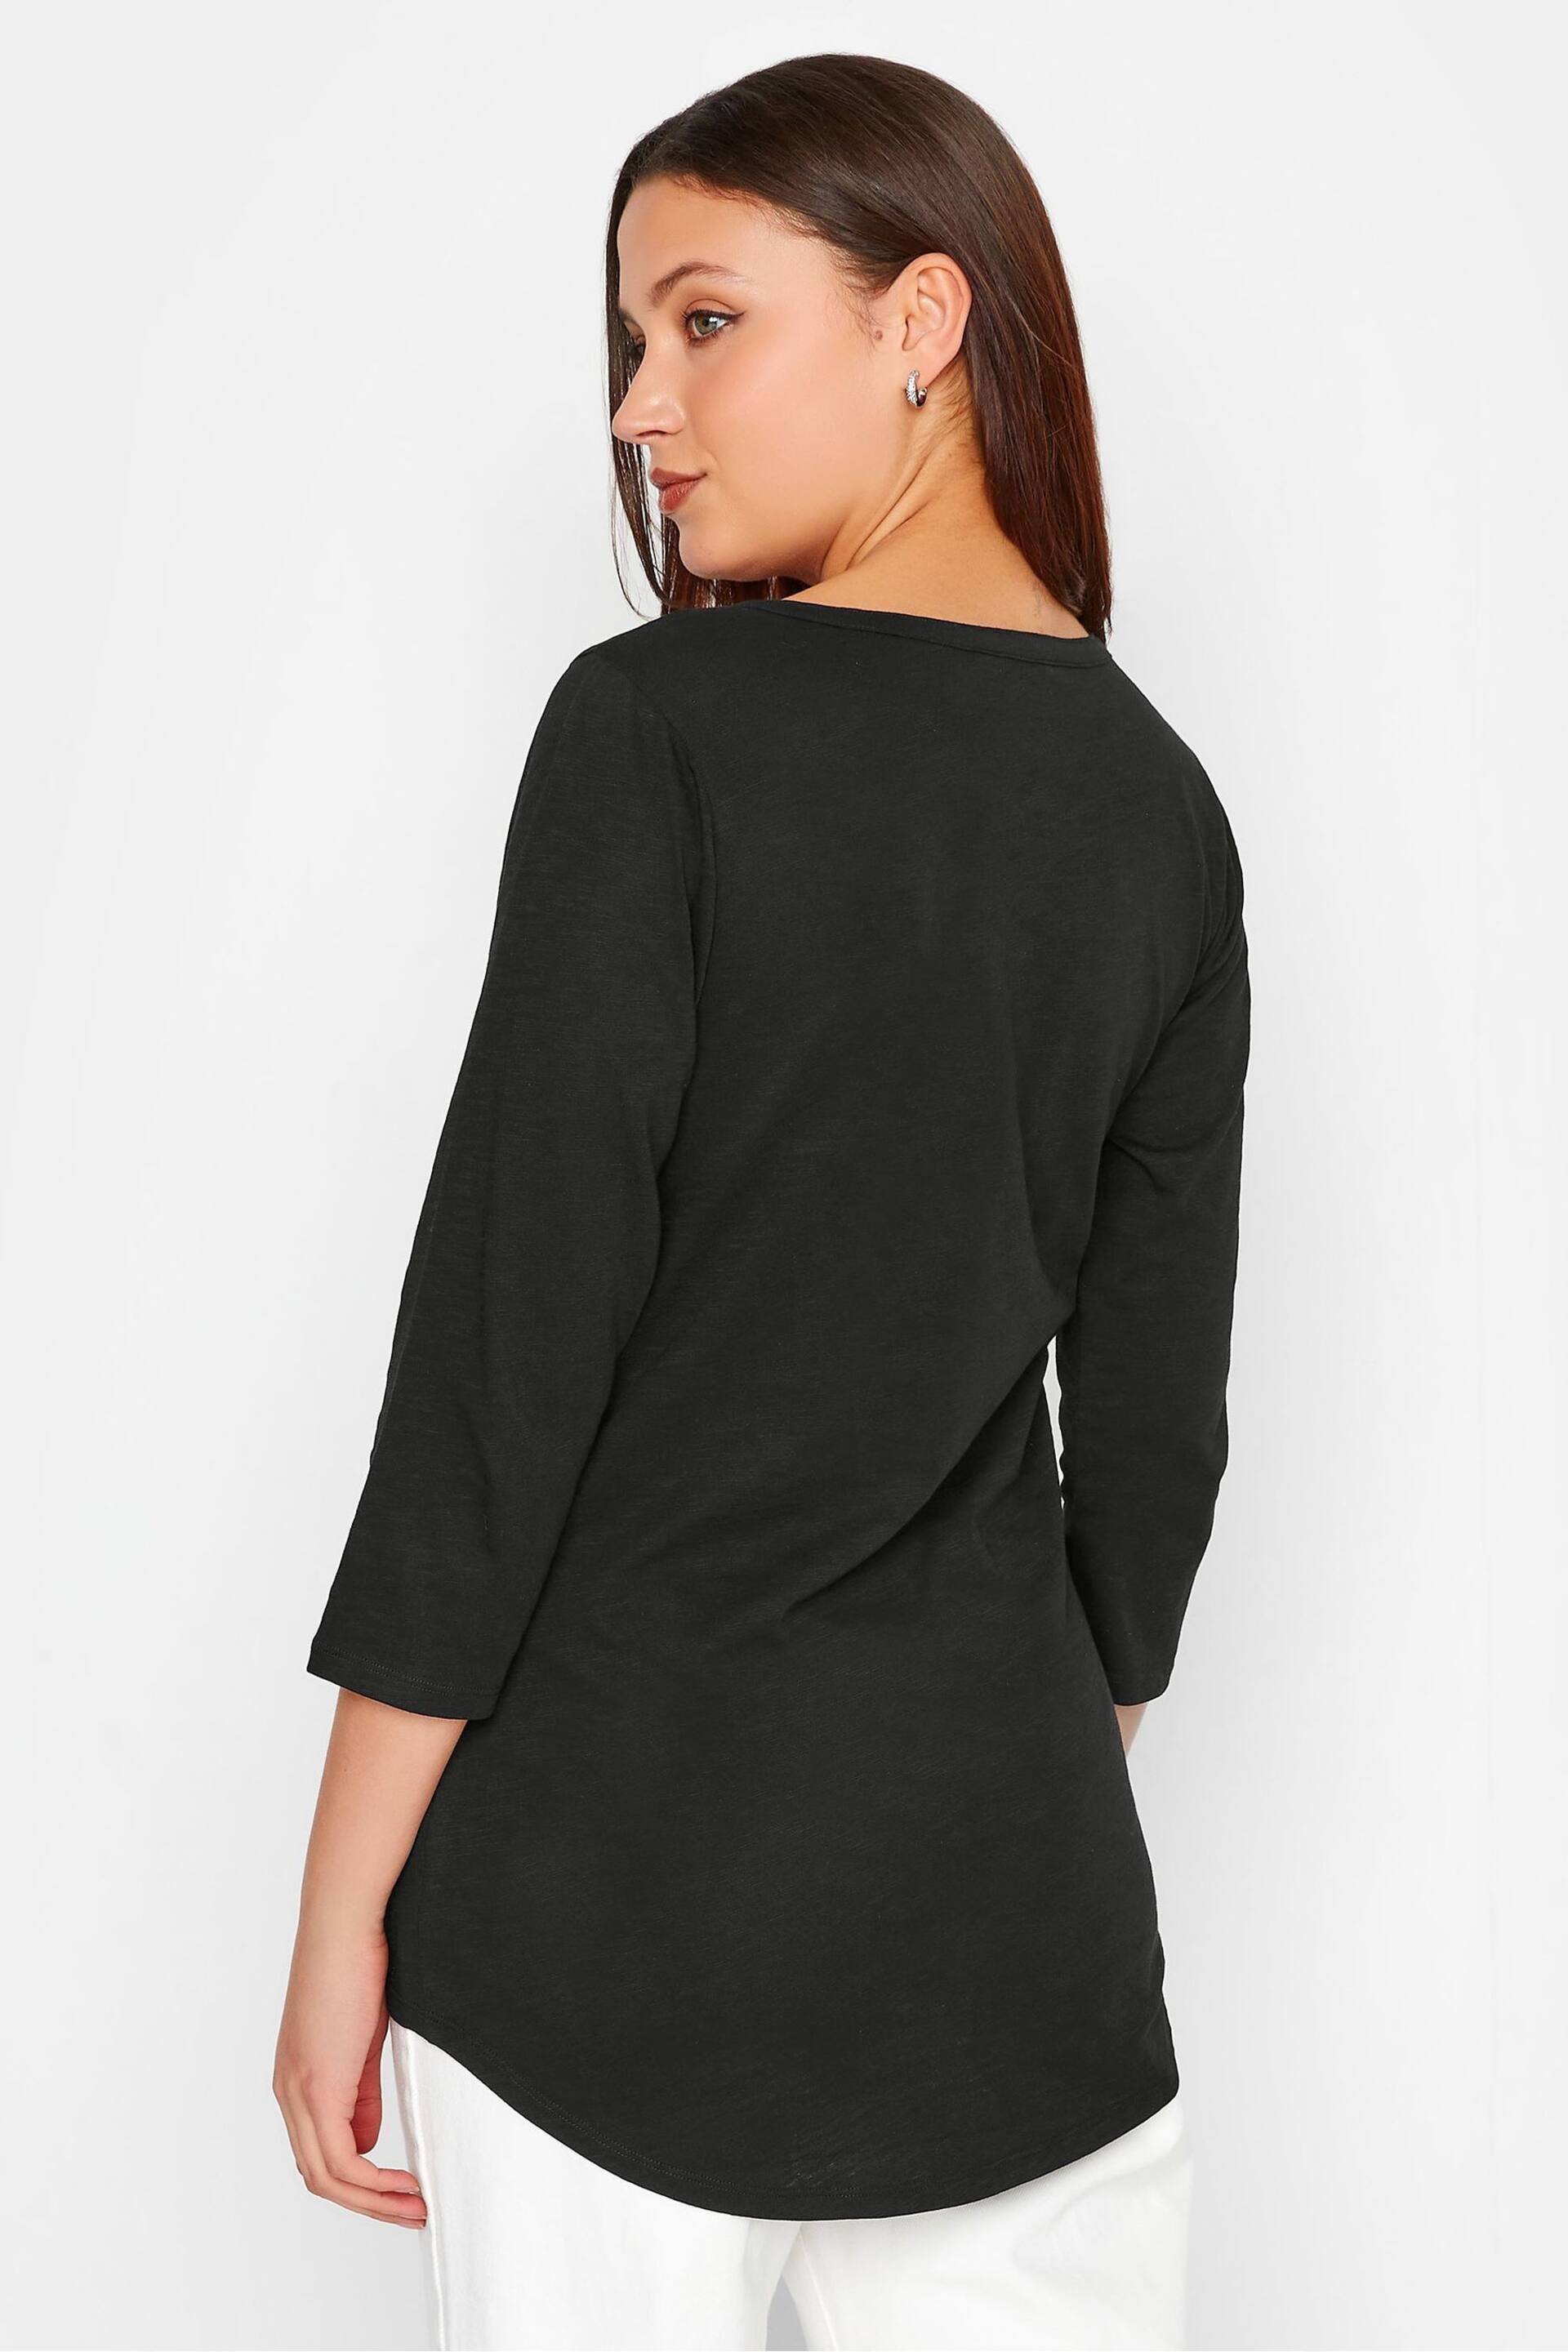 Long Tall Sally Black Henley Top - Image 7 of 7